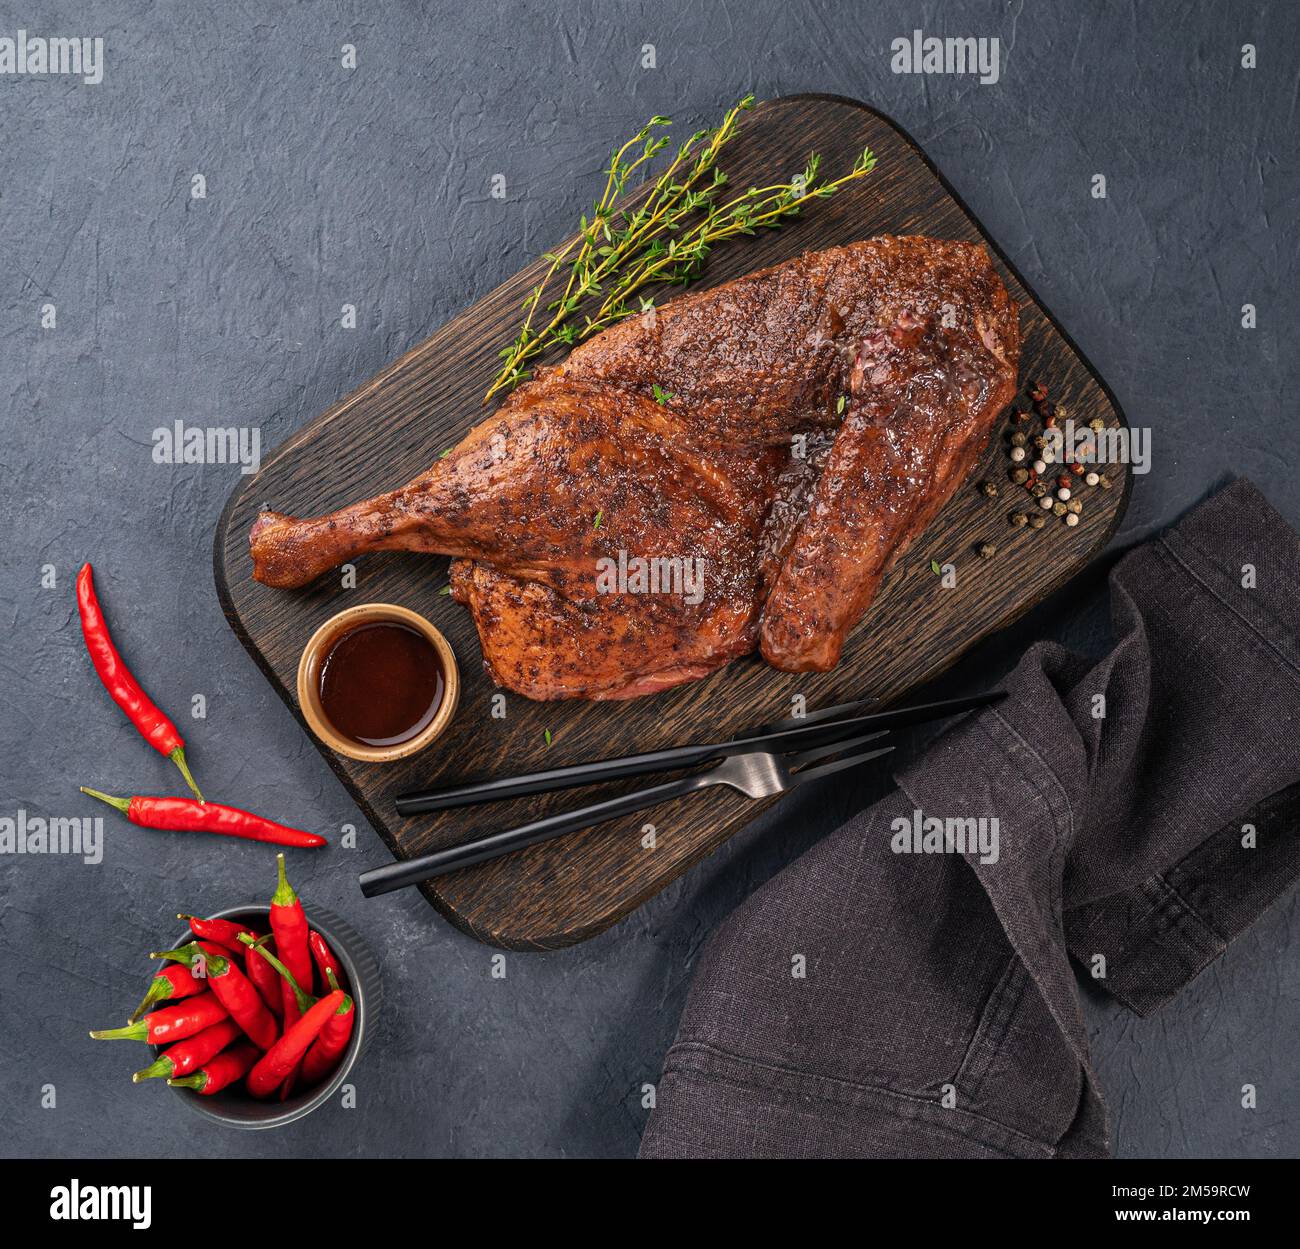 BBQ roast duck or chicken in spices and marinade on a wooden board with fresh spices and chili pepper on dark background. Top view and copy space. Stock Photo